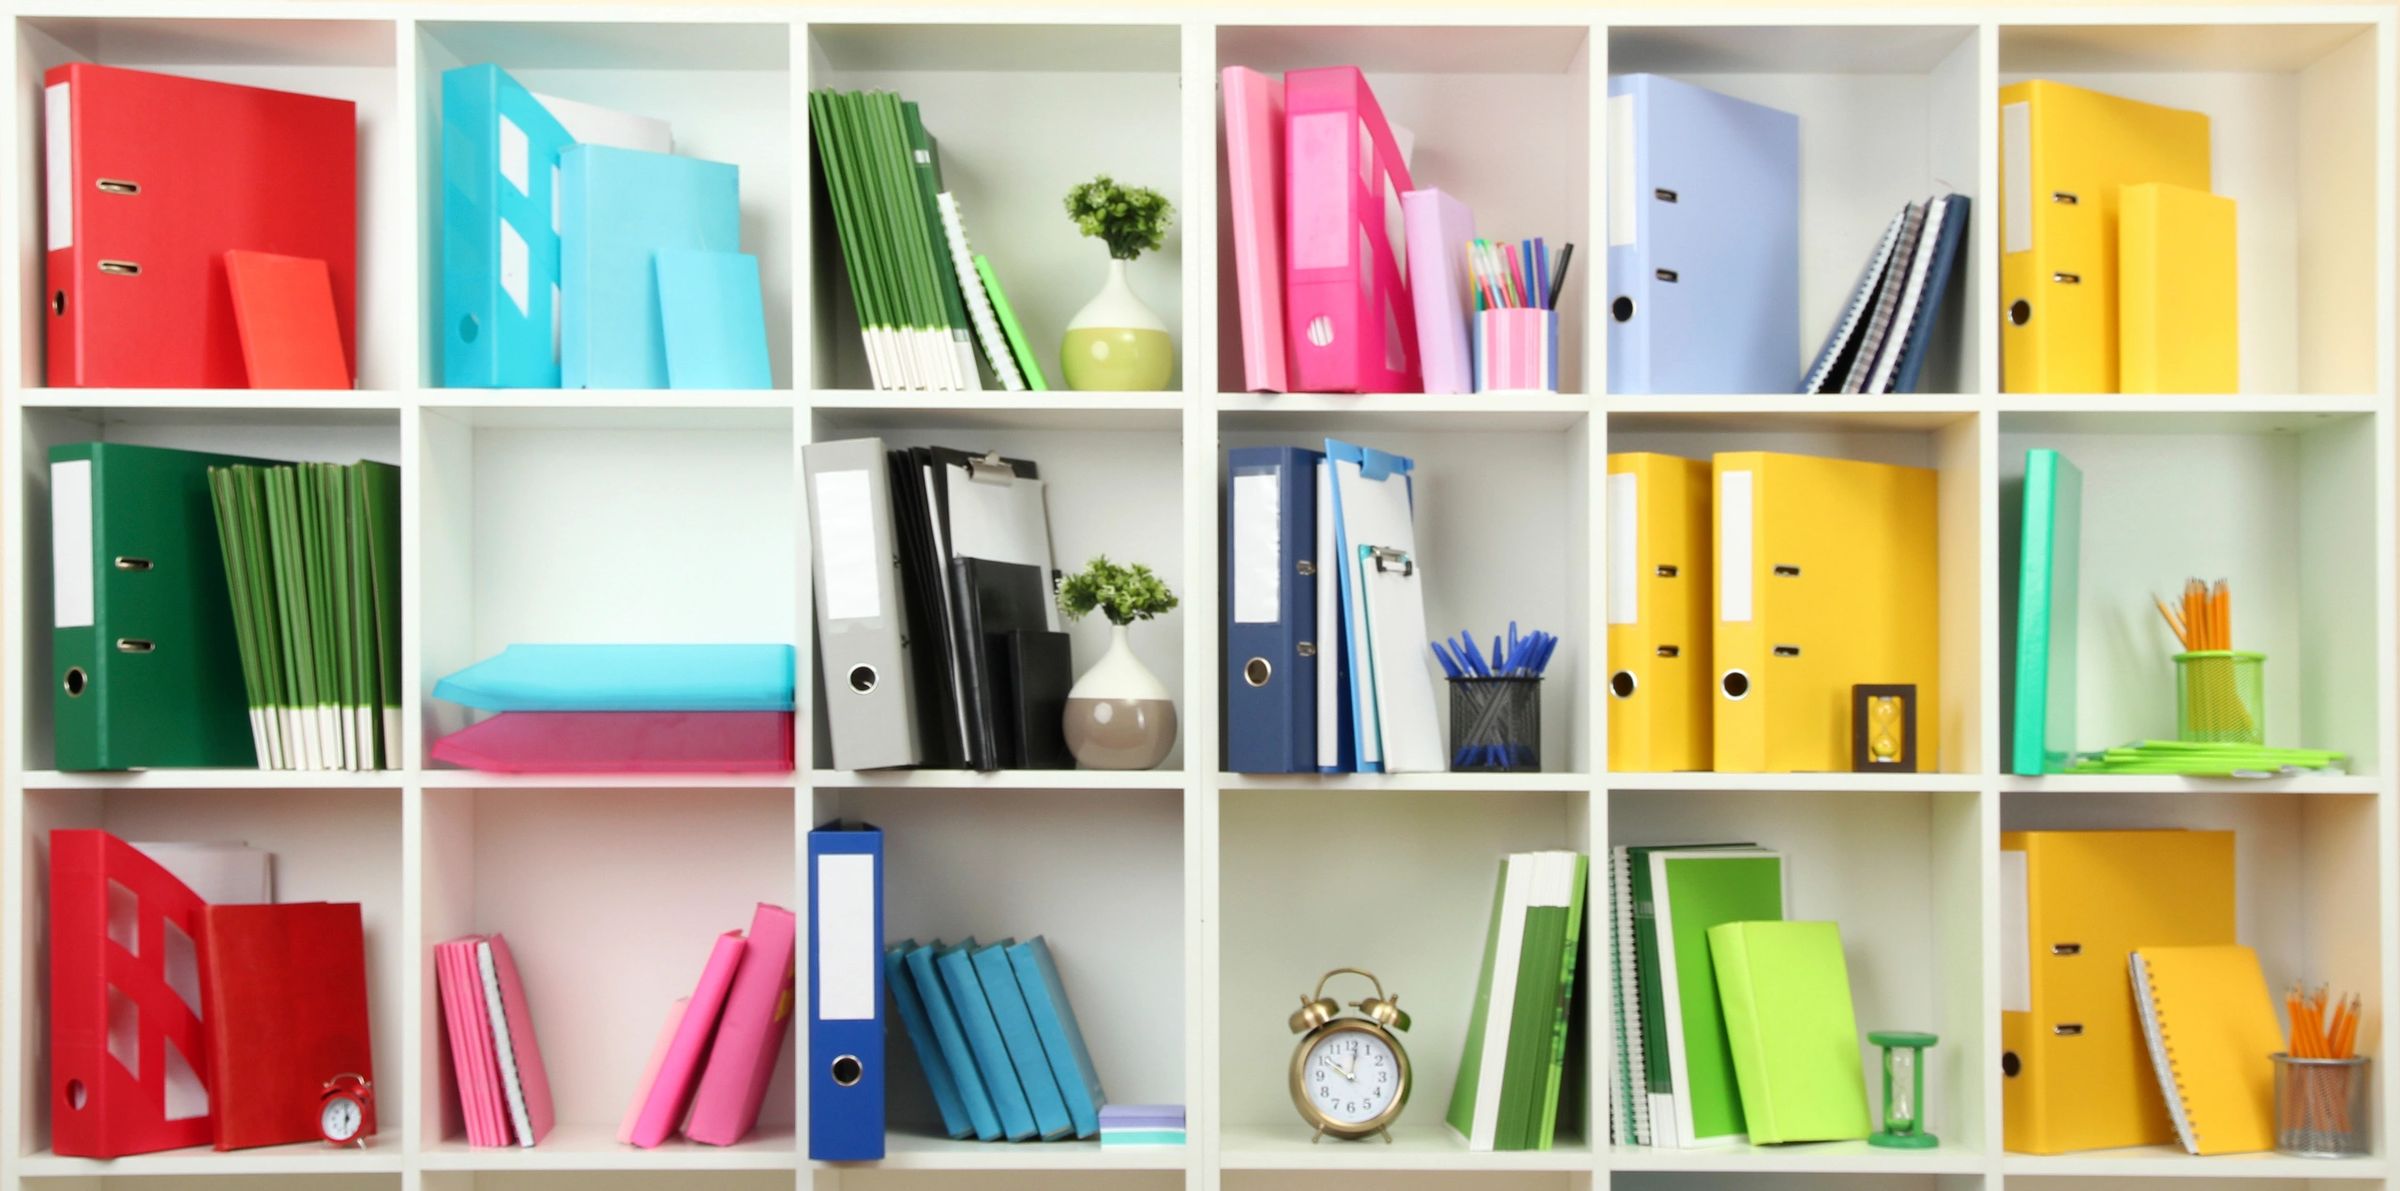 HOW TO BE ORGANIZED IN YOUR HOME AND OFFICE